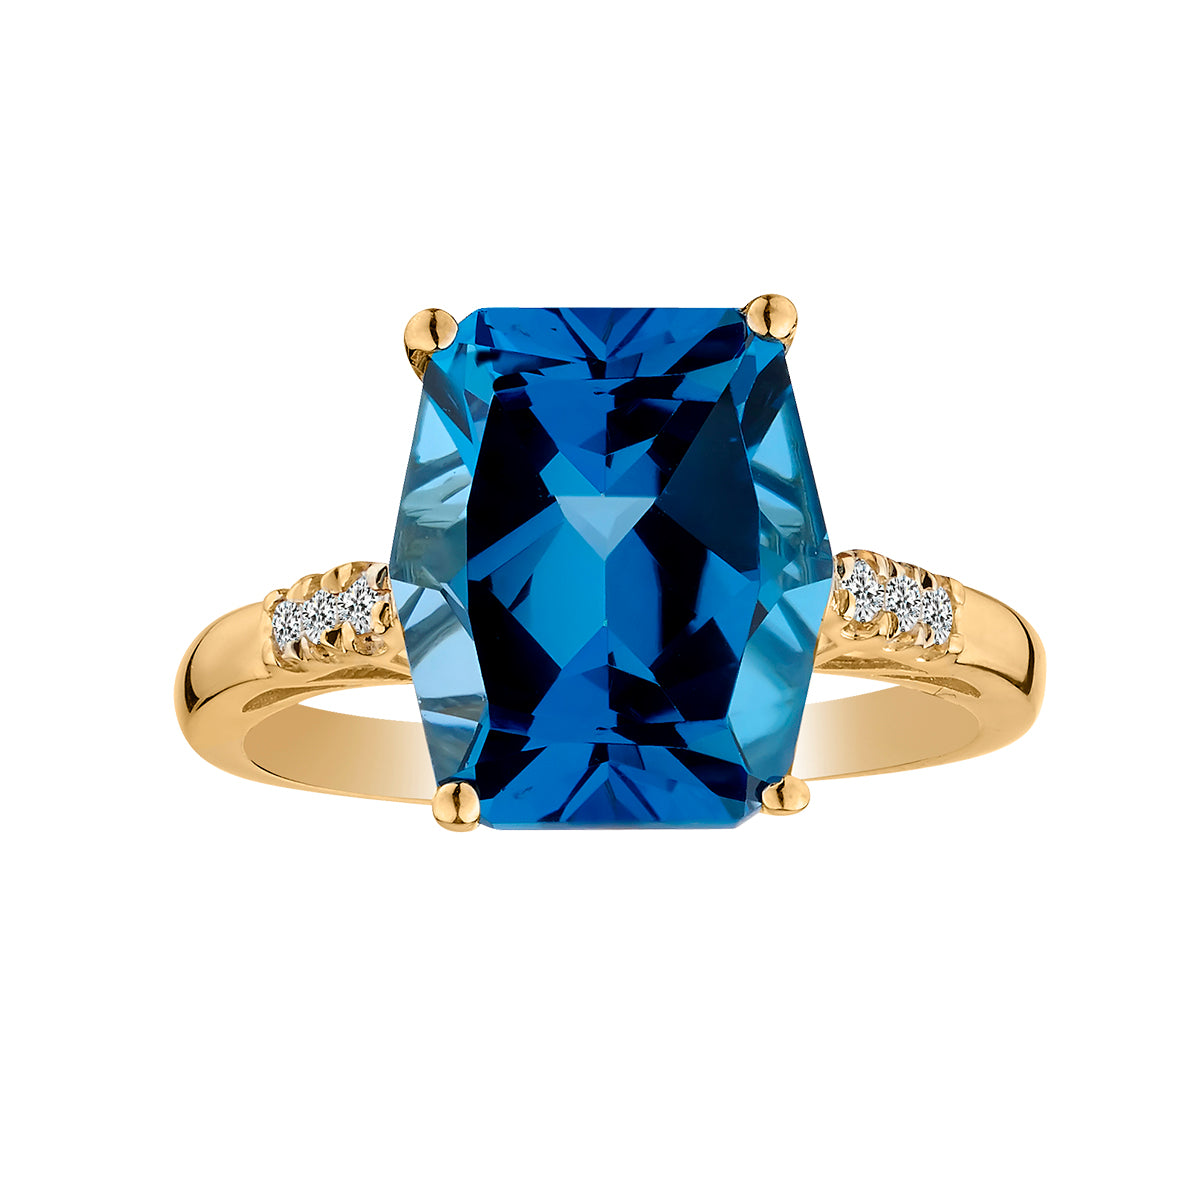 6.34 Carat London Blue Topaz and .07 Carat Diamond Ring,  10kt Yellow Gold. Gemstone Rings. Griffin Jewellery Designs